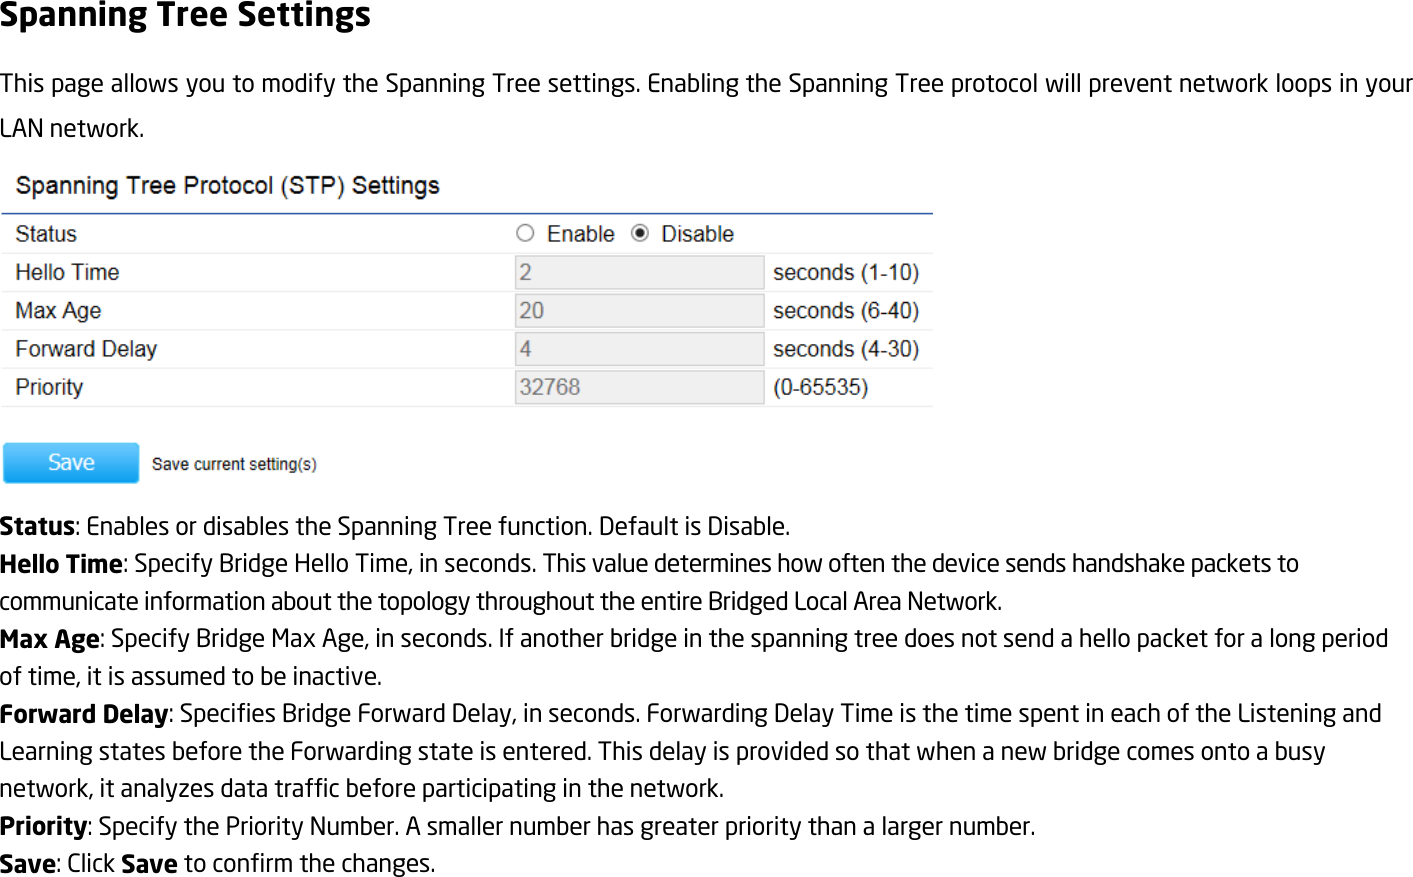 Spanning Tree Settings This page allows you to modify the Spanning Tree settings. Enabling the Spanning Tree protocol will prevent network loops in your LAN network.  Status: Enables or disables the Spanning Tree function. Default is Disable. Hello Time: Specify Bridge Hello Time, in seconds. This value determines how often the device sends handshake packets to communicate information about the topology throughout the entire Bridged Local Area Network. Max Age: Specify Bridge Max Age, in seconds. If another bridge in the spanning tree does not send a hello packet for a long period of time, it is assumed to be inactive. Forward Delay: Specifies Bridge Forward Delay, in seconds. Forwarding Delay Time is the time spent in each of the Listening and Learning states before the Forwarding state is entered. This delay is provided so that when a new bridge comes onto a busy network, it analyzes data traffic before participating in the network. Priority: Specify the Priority Number. A smaller number has greater priority than a larger number. Save: Click Save to confirm the changes.